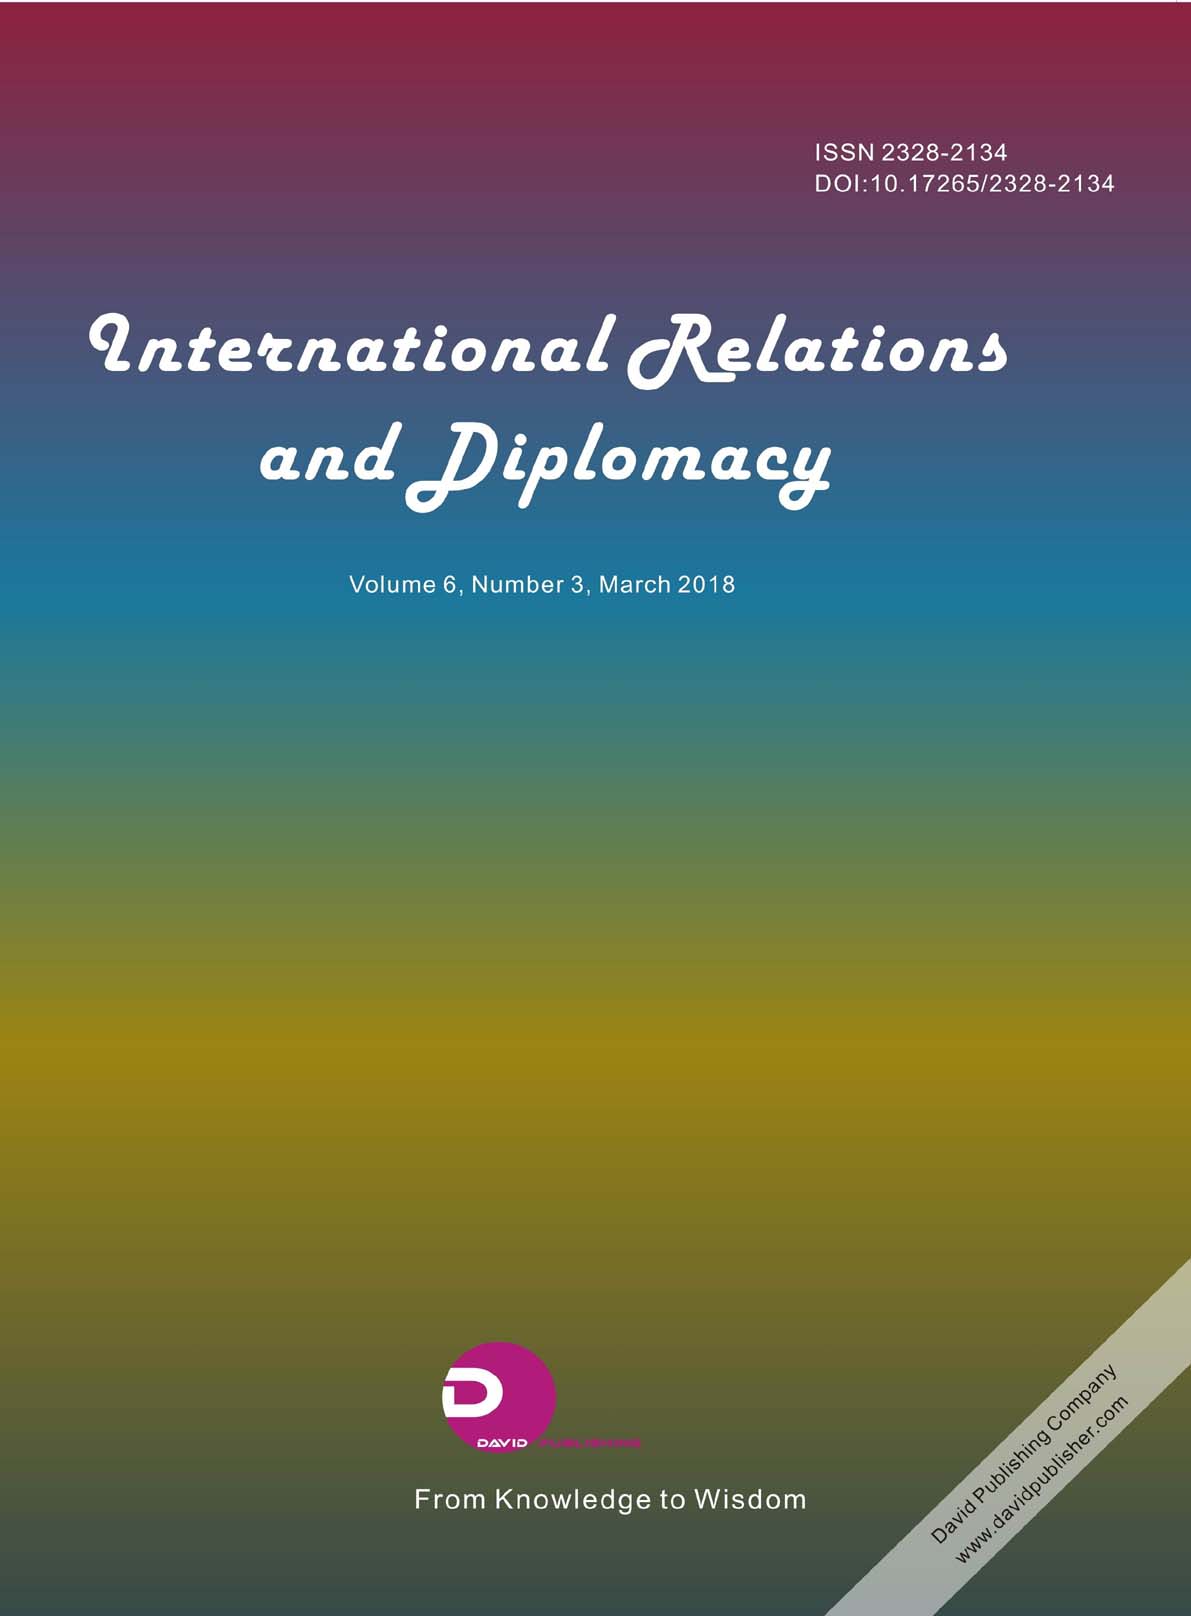 International Relations and Diplomacy